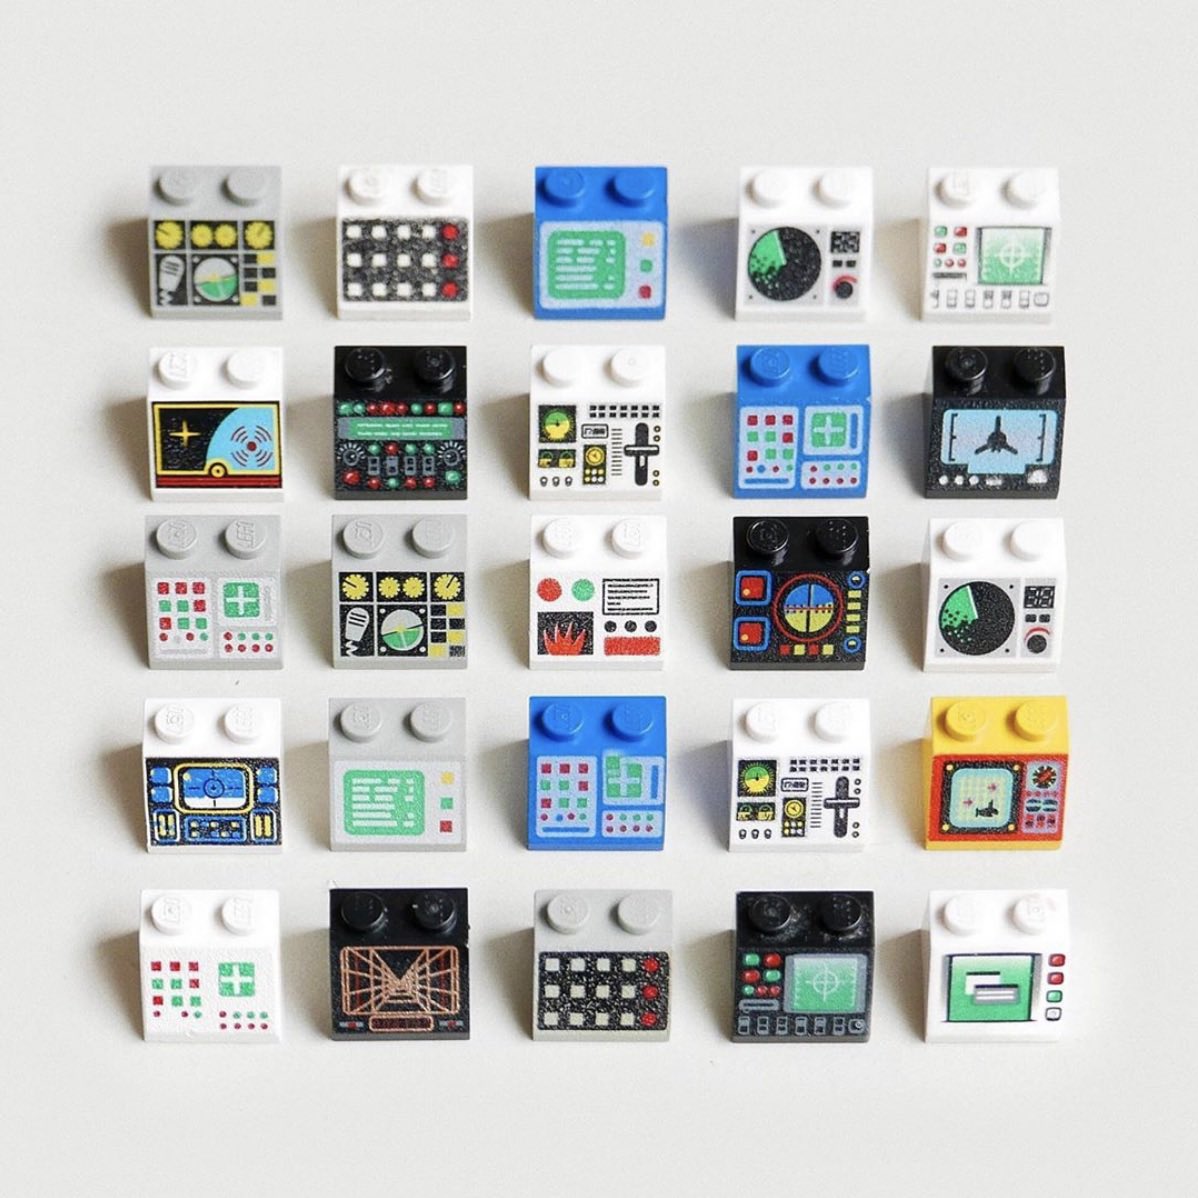 📱 To date, Lego has released 25 different smartphone models (1x2 printed tiles). 🤓 Read my new blog post for a quick history - stubot.me 🟢 N.B. This collection is inspired by @presentcorrect’s legendary ‘Typology of Lego Computers’ photograph. #Lego #レゴ